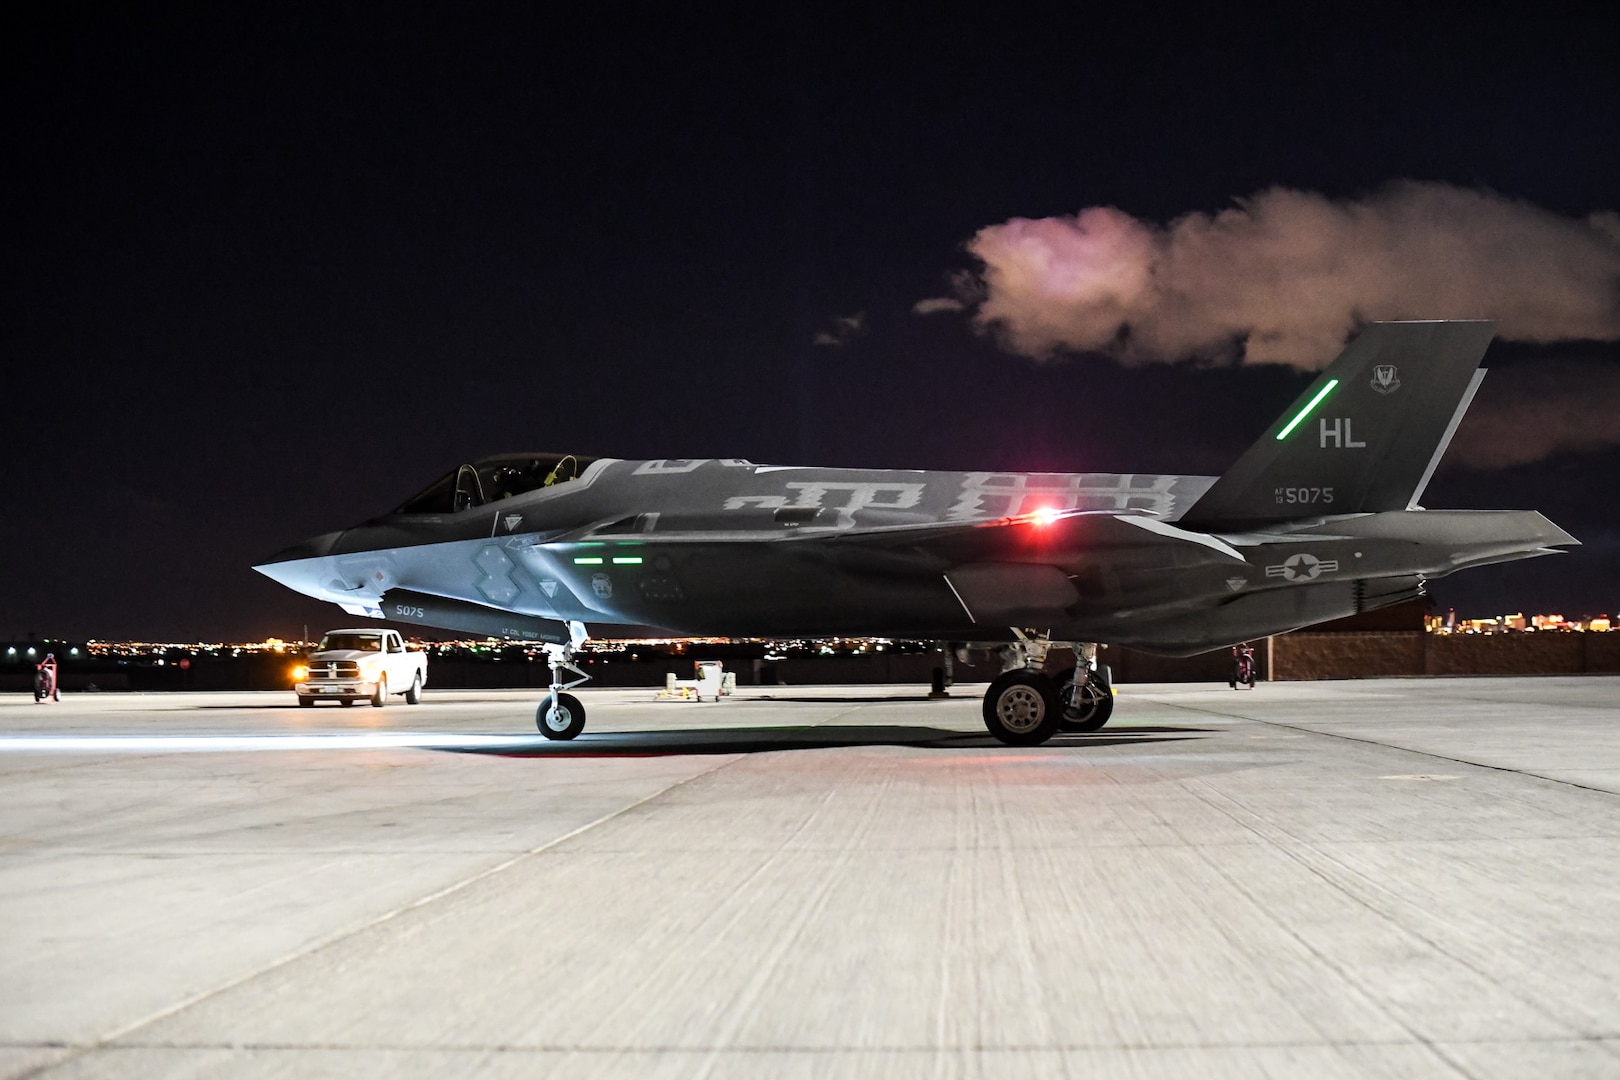 An F-35A Lightning II aircraft piloted by Lt. Col. Yosef Morris, 388th Fighter Wing, taxis during Red Flag 17-1, Nellis Air Force Base, Nevada, Feb. 3, 2017. Morris flew the 2,000th sortie during the Air Force's premier air-to-air combat training exercise. This is the first deployment of the F-35A to a Red Flag. Maintainers and pilots from Hill Air Force Base's 388th and 419th Fighter Wings deployed the fifth-generation fighter to Nellis AFB Jan. 20. The exercise provides aircrews the experience of multiple, intensive air combat sorties in the safety of a training environment. (U.S. Air Force photo/R. Nial Bradshaw))